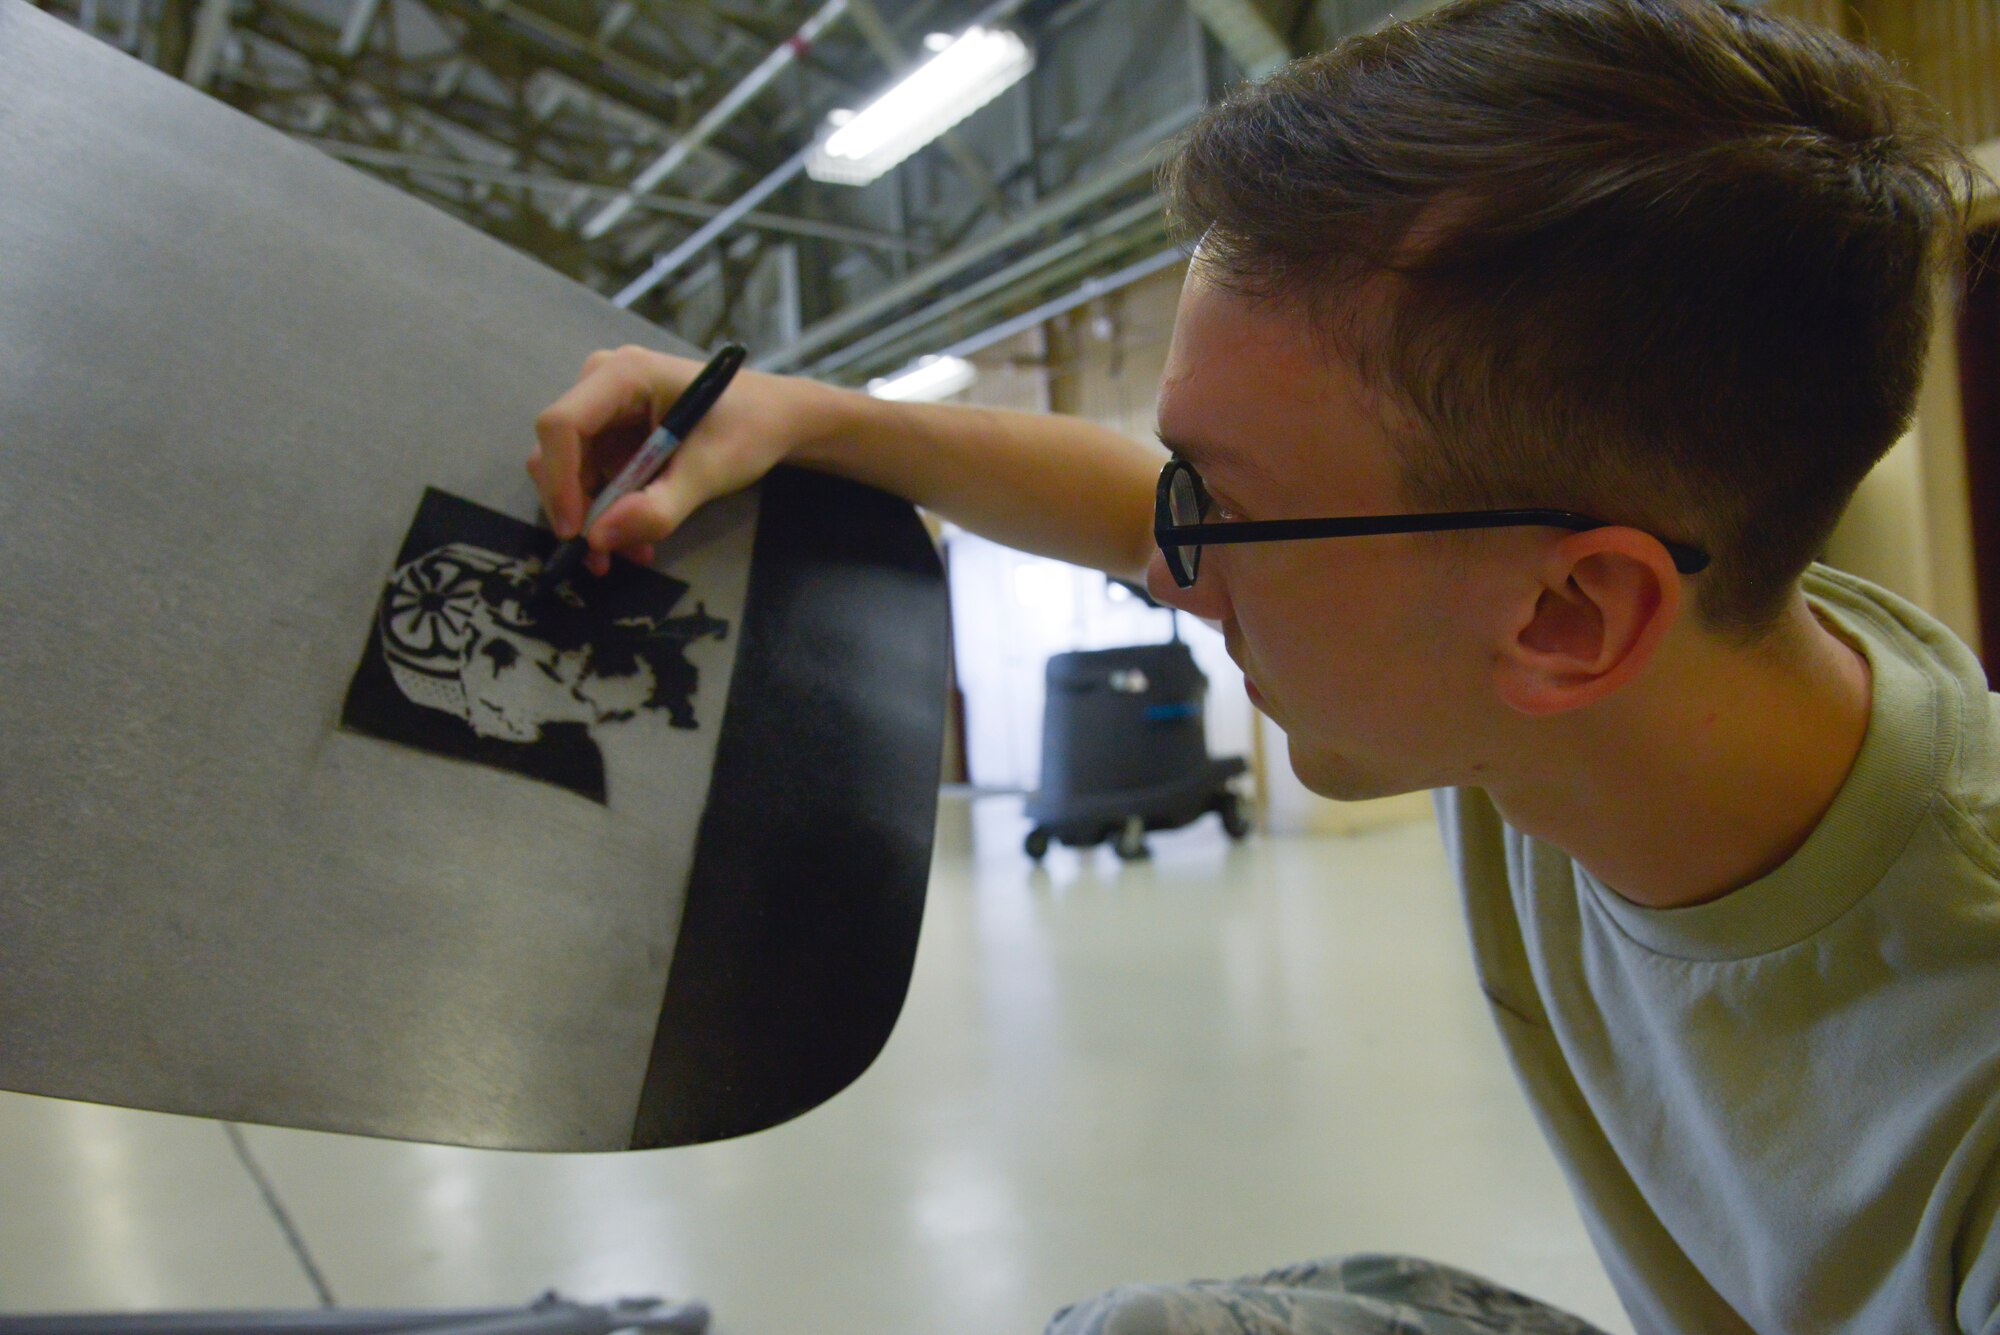 Airman 1st Class Kyle Cazier, 374th Maintenance Squadron propulsion flight aerospace propulsion apprentice, darkens part of a ‘Mr. Miyagi’ drawing on a propeller blade at Yokota Air Base, Japan, Sept. 23, 2015. The drawing is a reference point on the number three blade to ensure the number one blade is kept pointing up, preventing hydraulic fluid leaks. (U.S. Air Force photo by Senior Airman David Owsianka/Released)